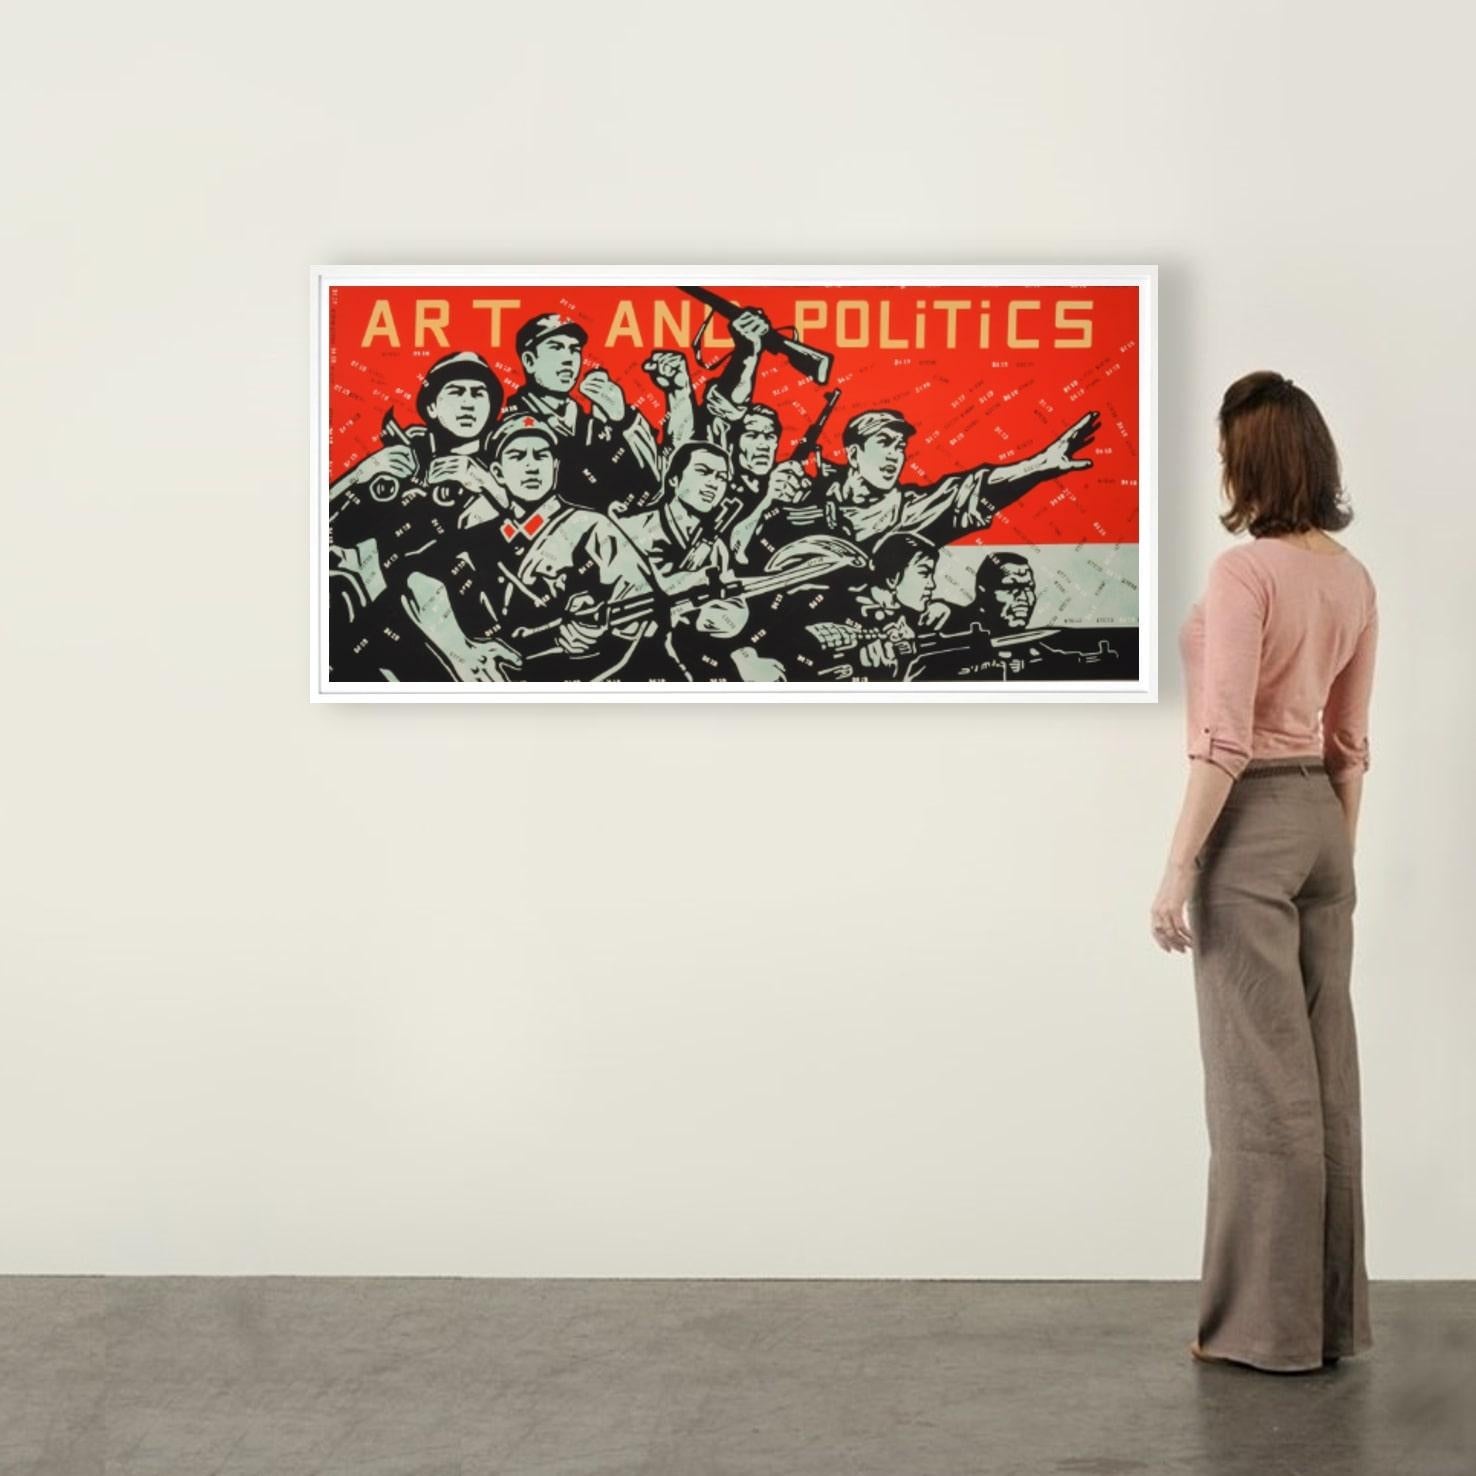 Wang Guangyi, Art and Politics
Contemporary, 21st Century, Lithograph, Limited Edition
Lithograph accompanied by poem by Fernando Arrabal
80 x 120 cm (31.5 x 47.2 in.)
Edition of 165 plus 4 APs
Signed and numbered, accompanied by Certificate of